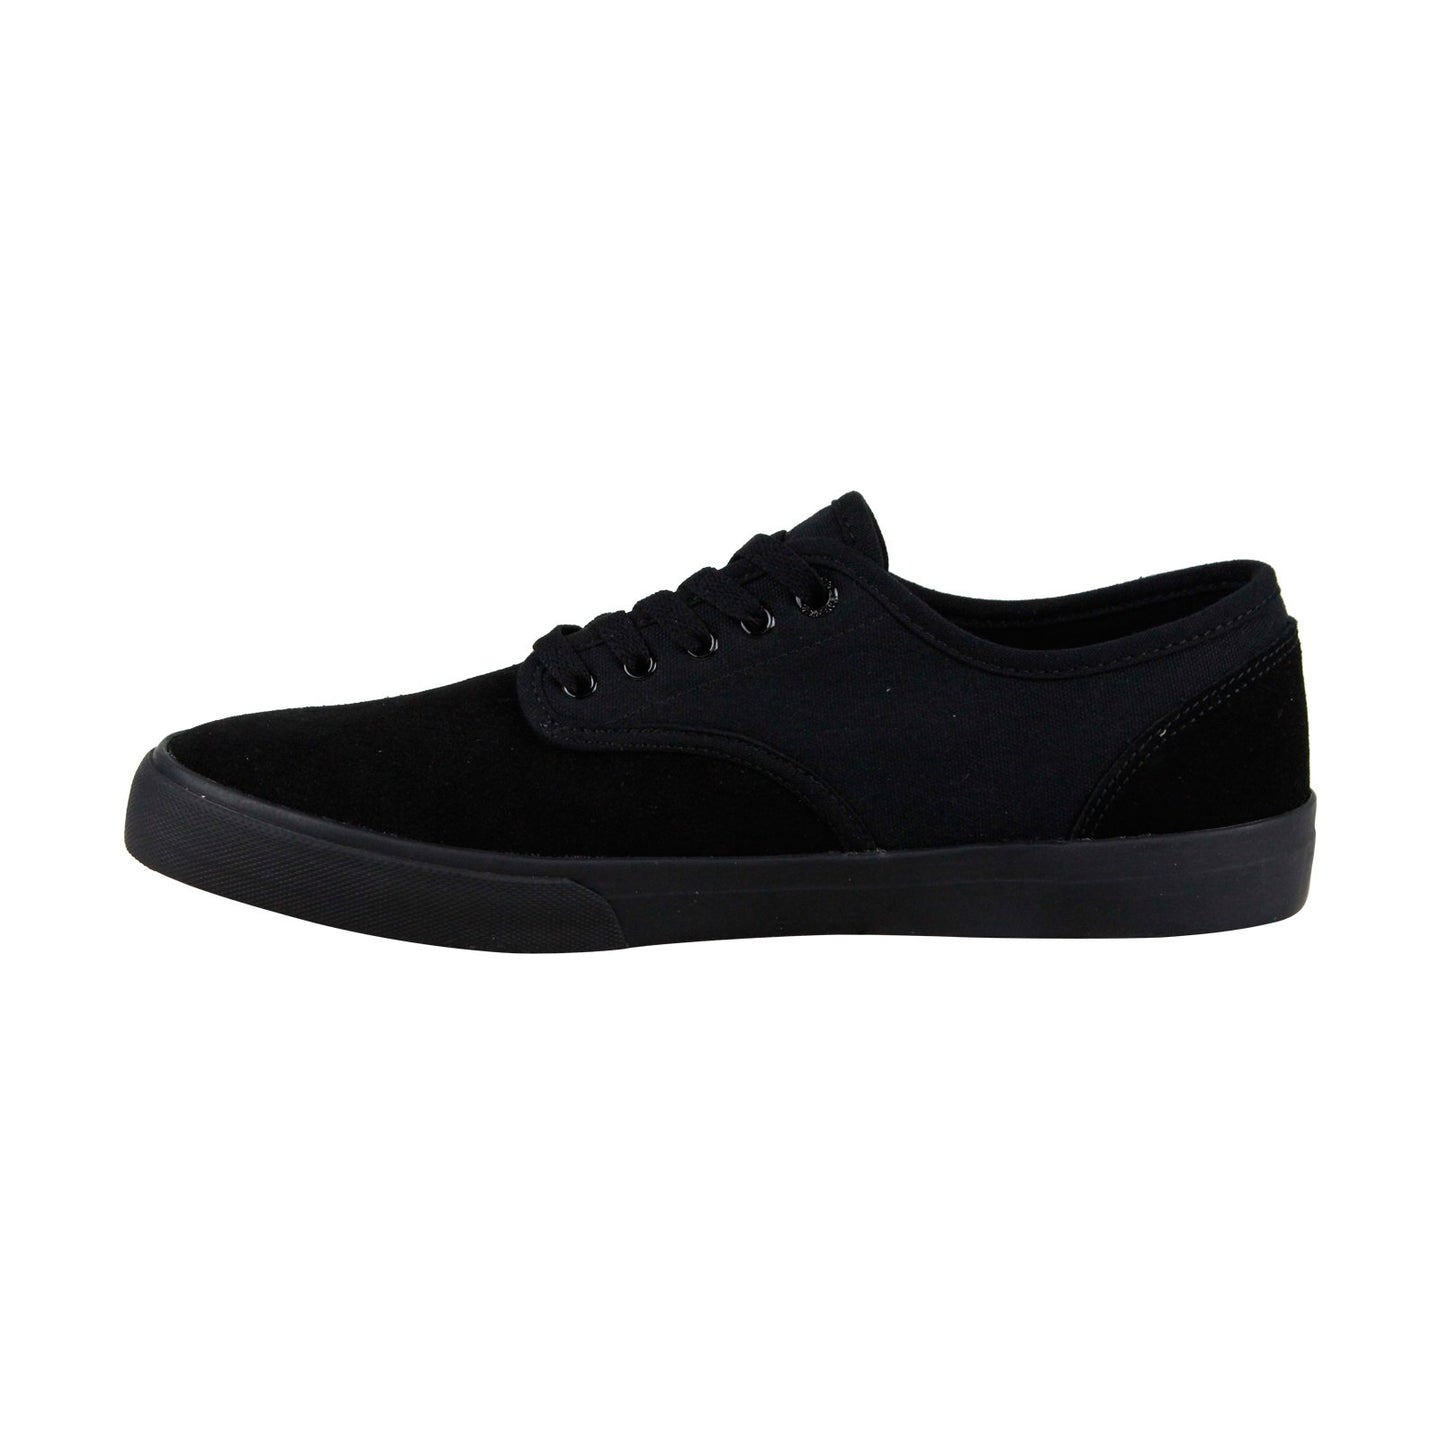 Emerica Wino Standard Mens Black Nubuck Leather Lace Up Skate Sneakers ...